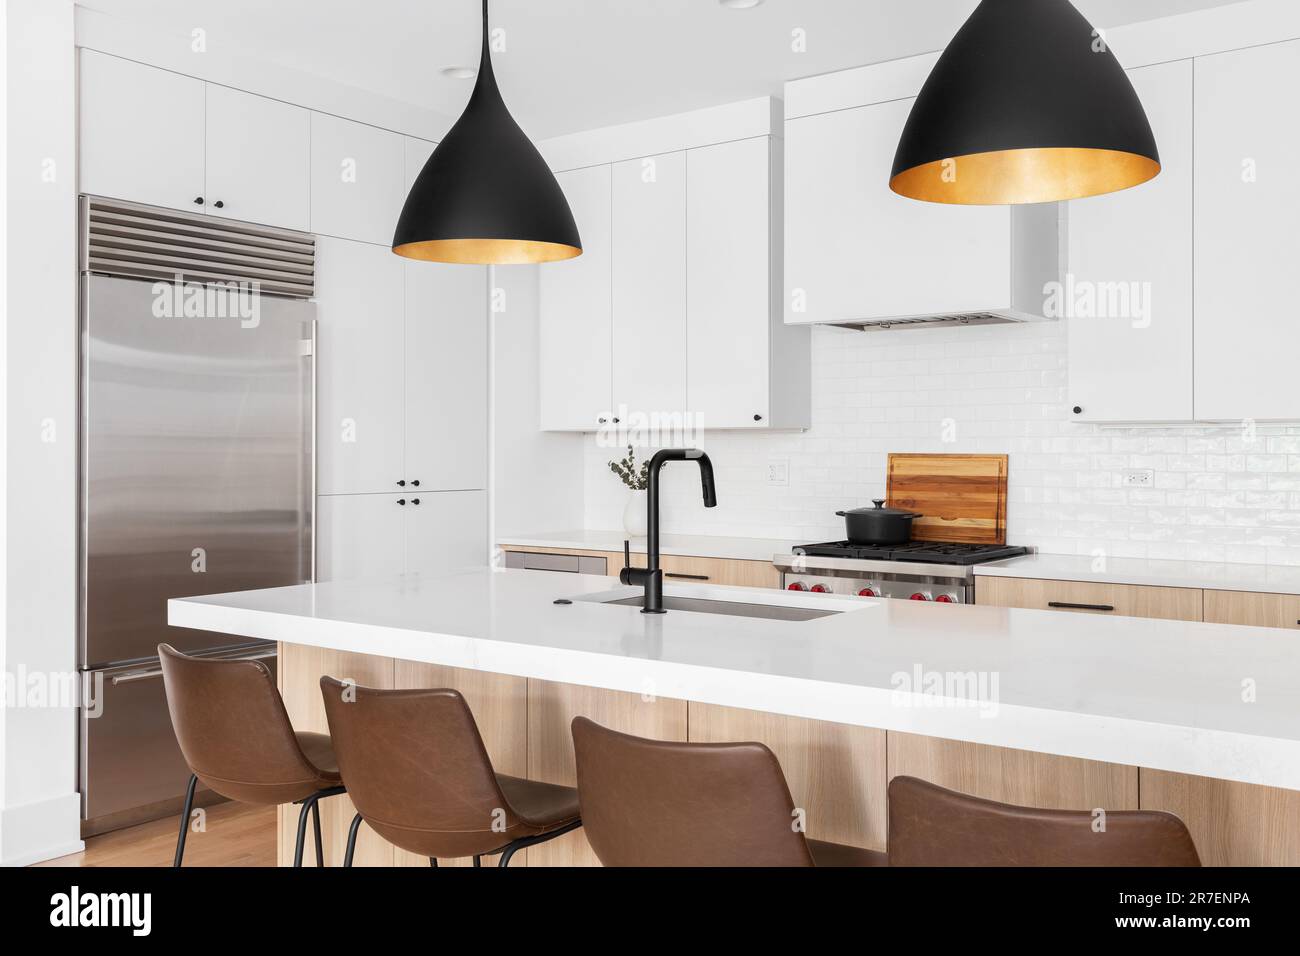 https://c8.alamy.com/comp/2R7ENPA/a-kitchen-detail-with-white-and-white-oak-cabinets-leather-chairs-sitting-at-an-island-and-a-black-and-gold-light-hanging-above-no-names-or-brands-2R7ENPA.jpg